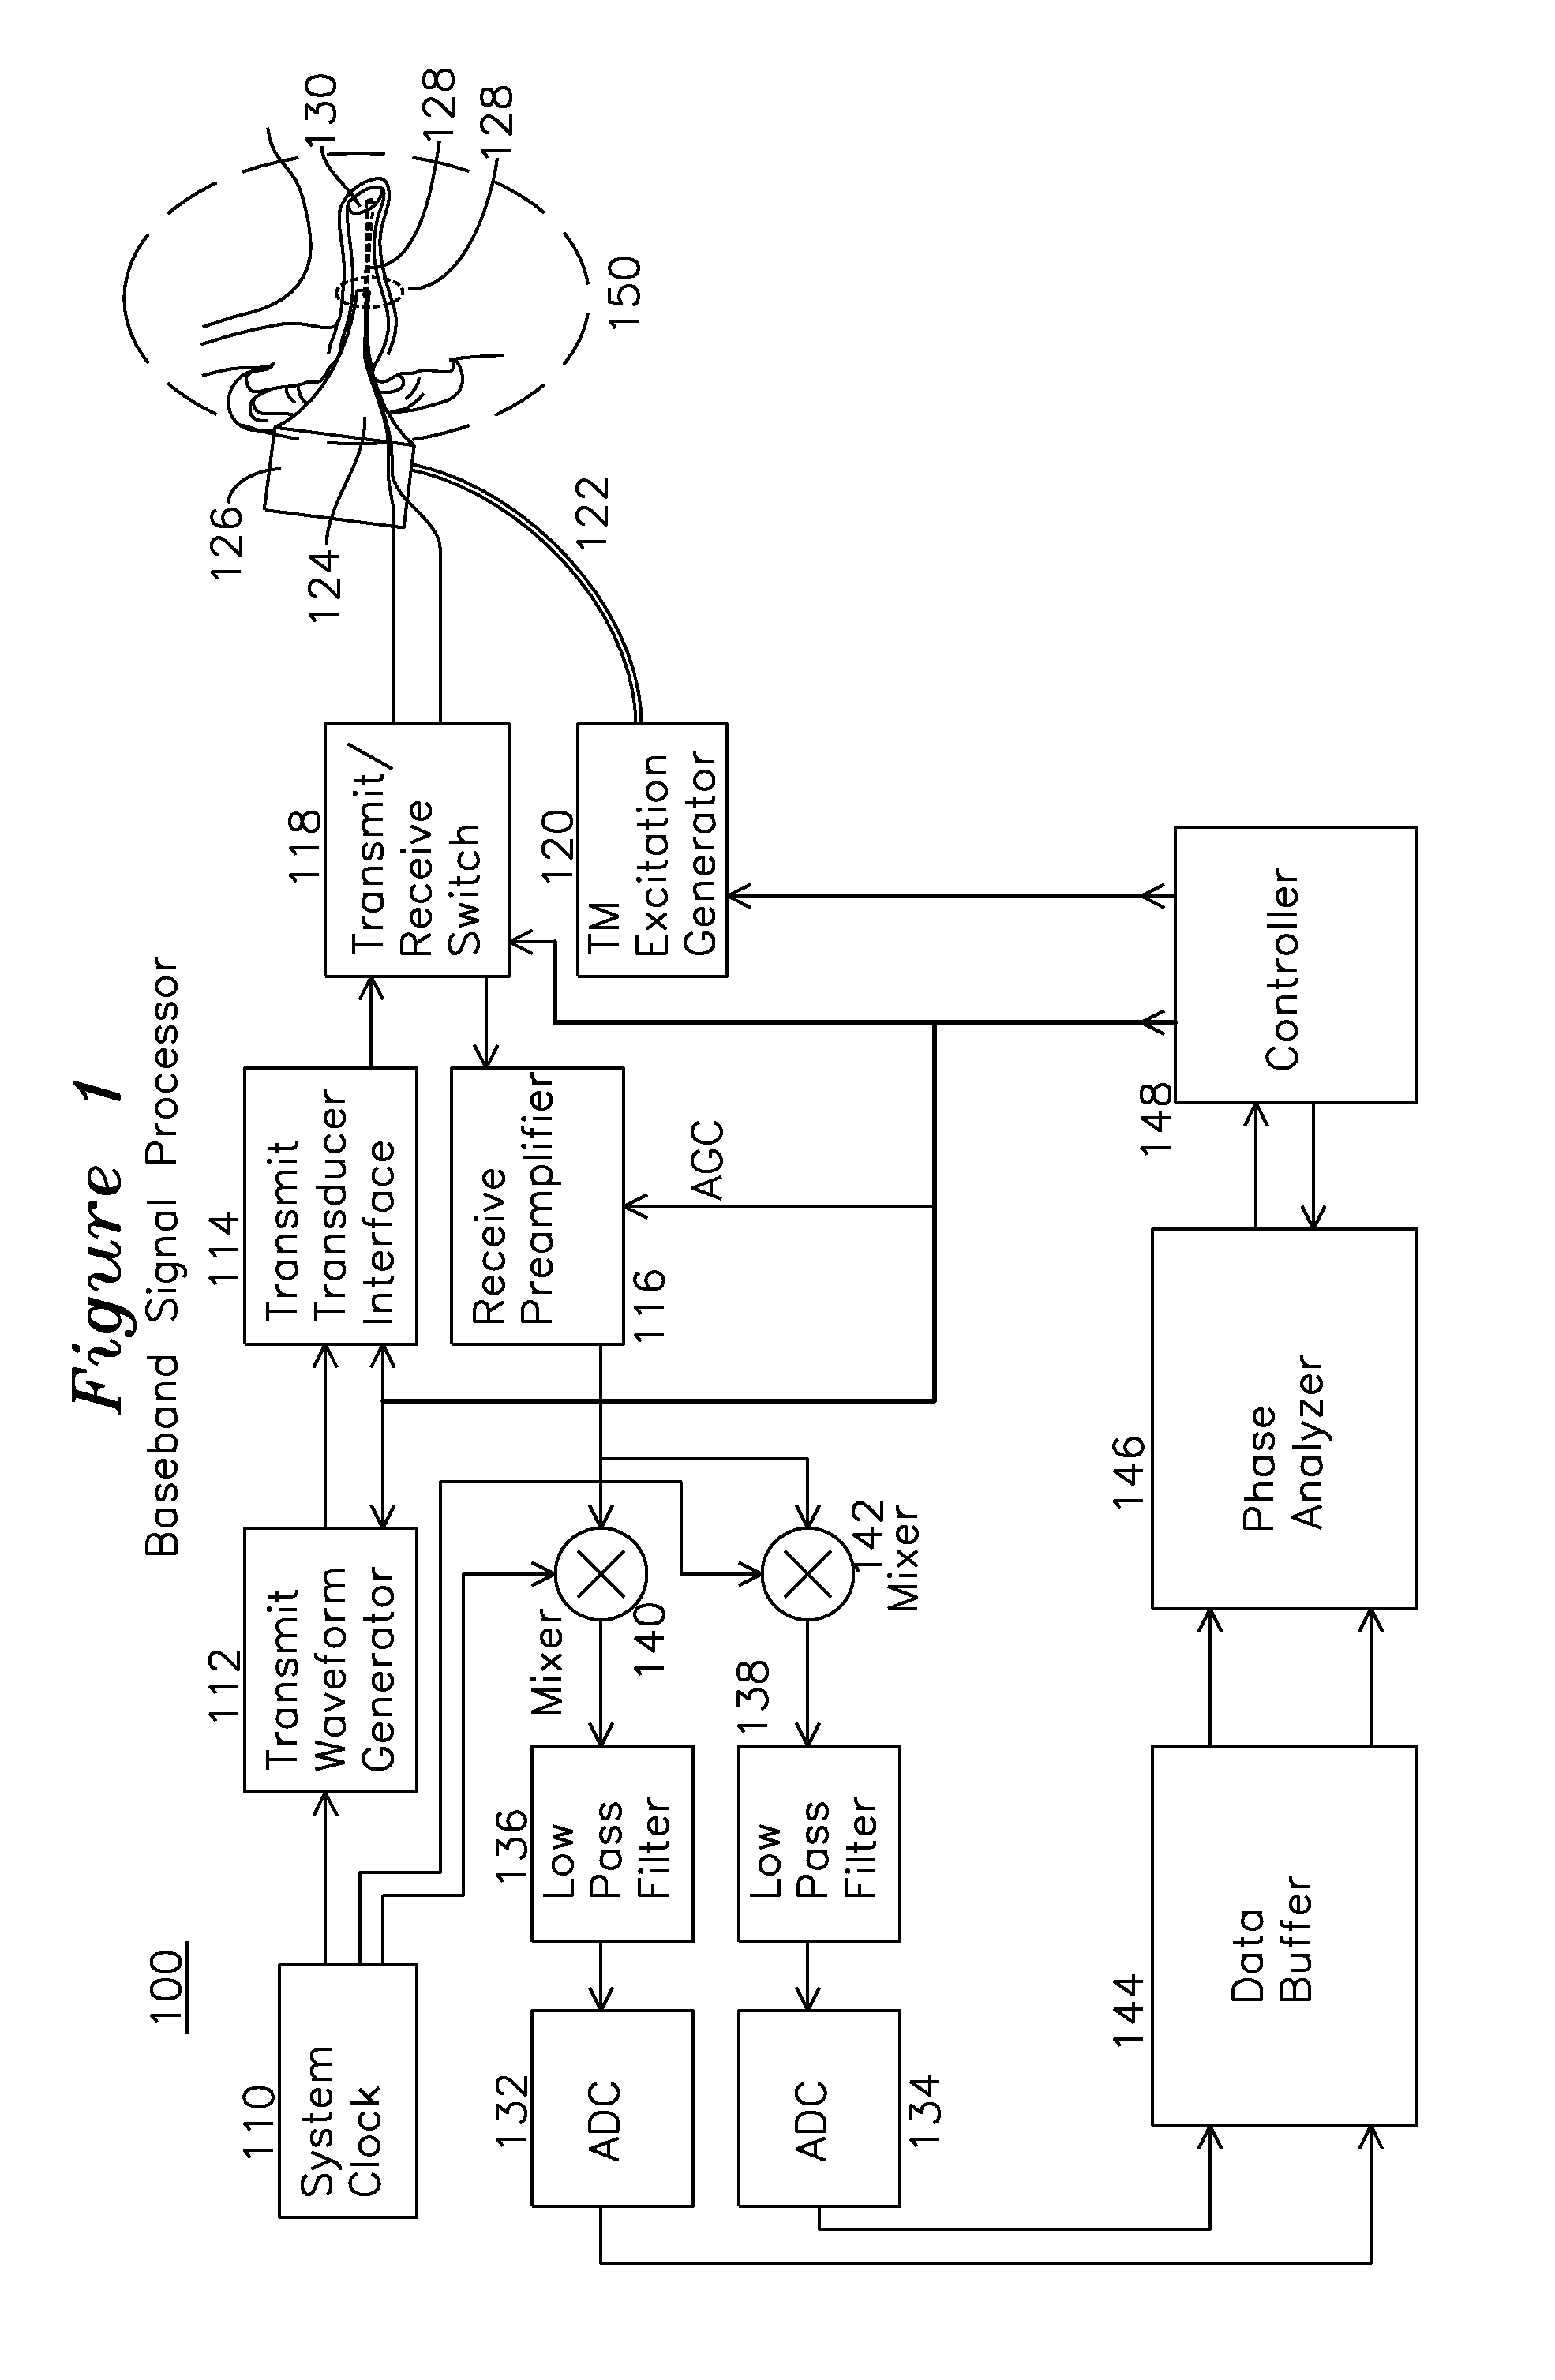 Apparatus and Method for Characterization of Acute Otitis Media